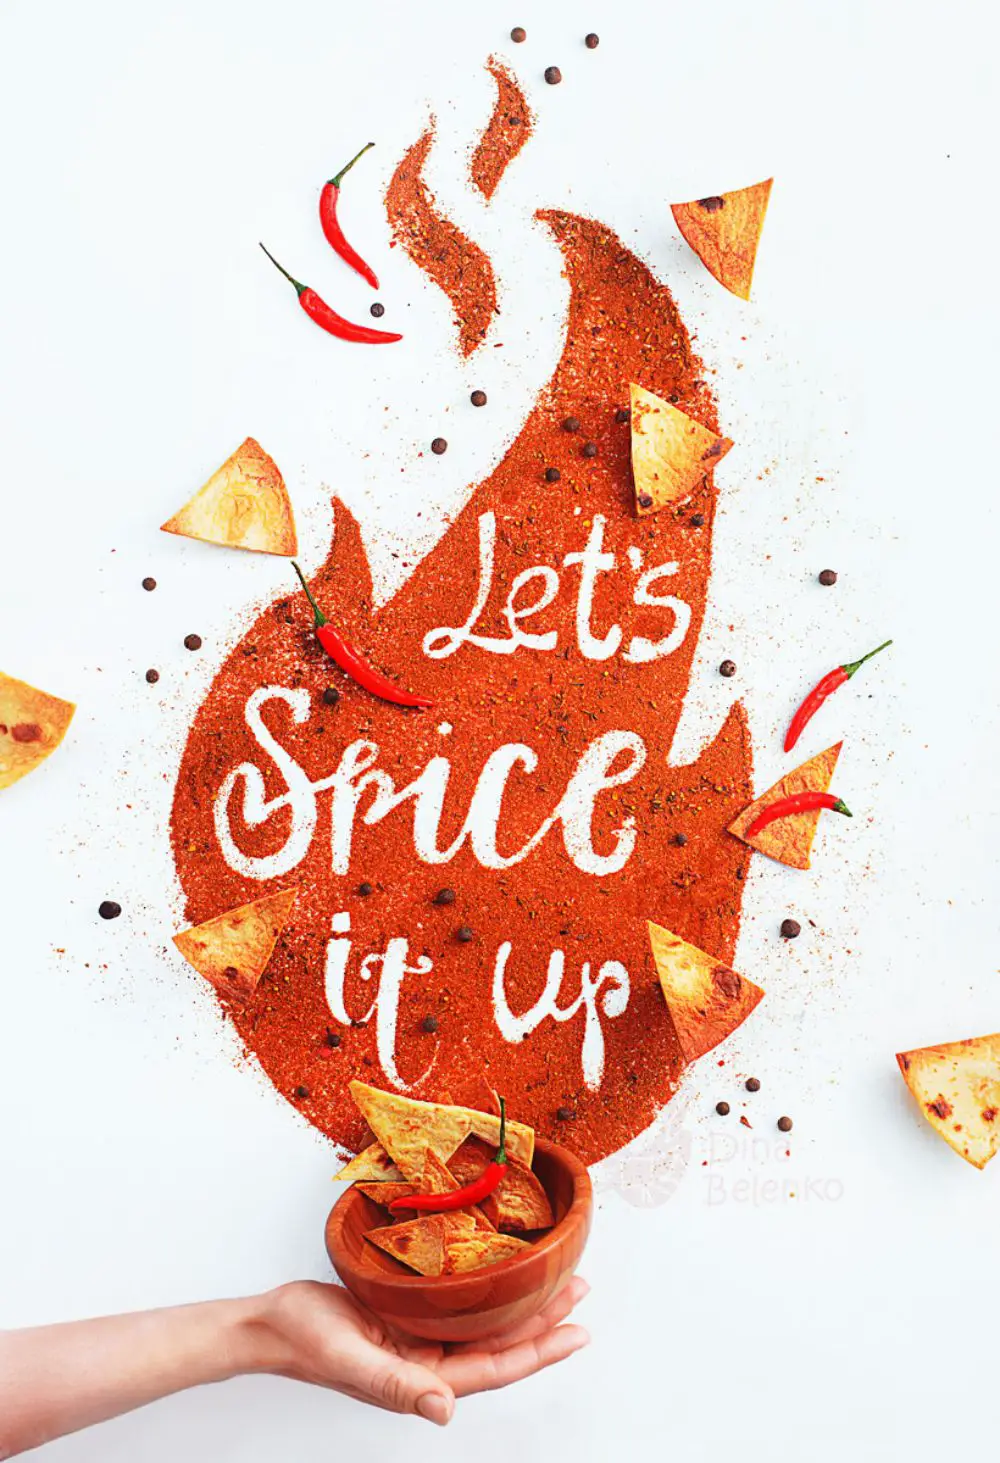 Spice it Up!